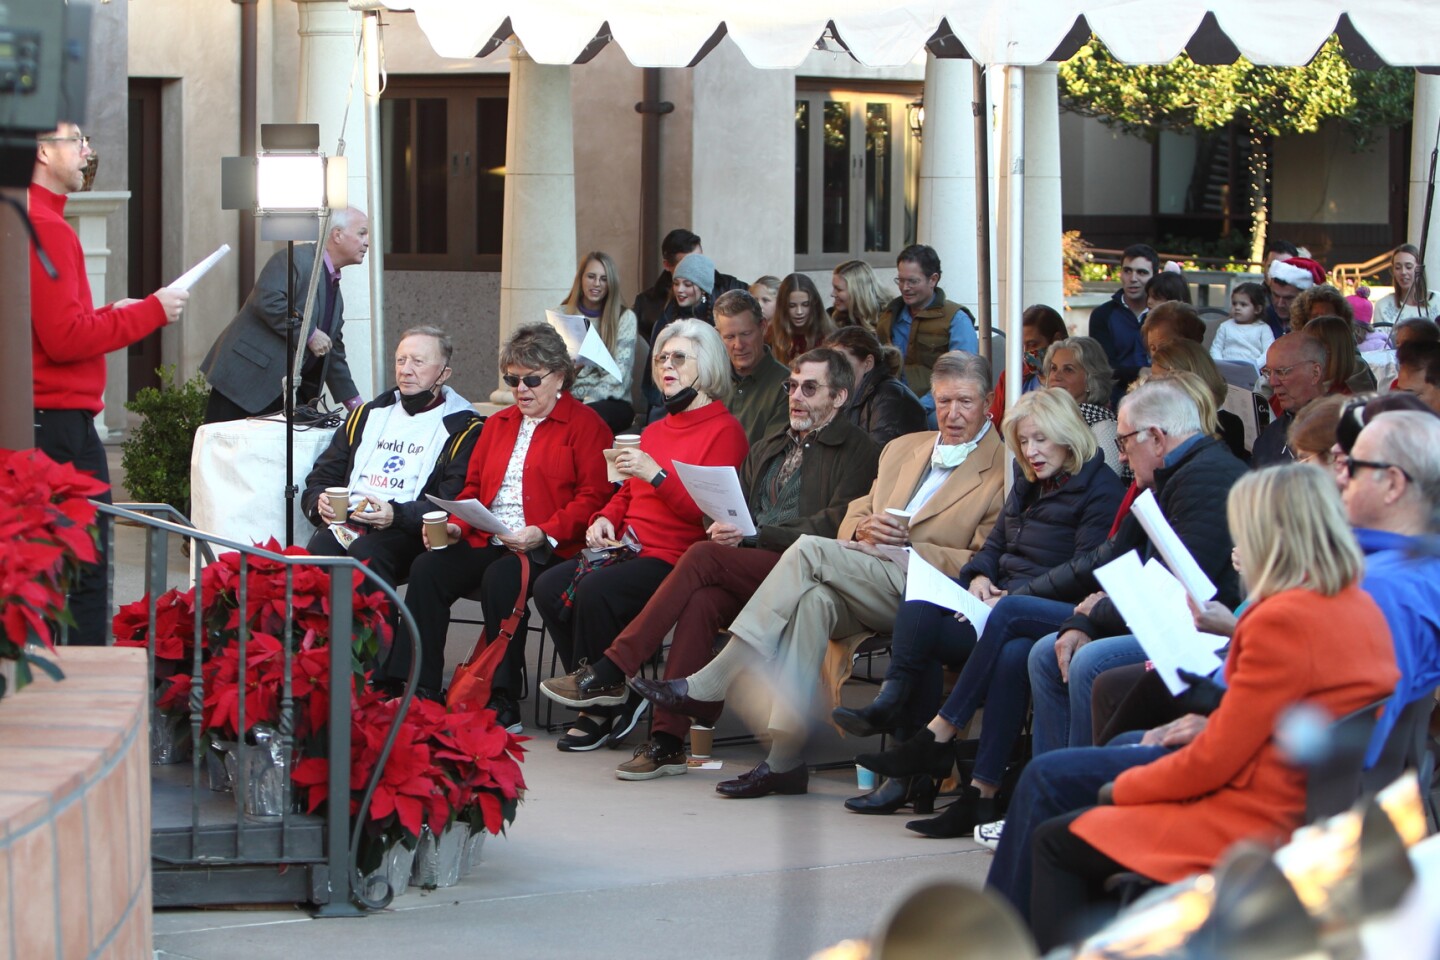 Attendees join in singing Christmas carols at The Village Church "Coming Home at Christmas" event